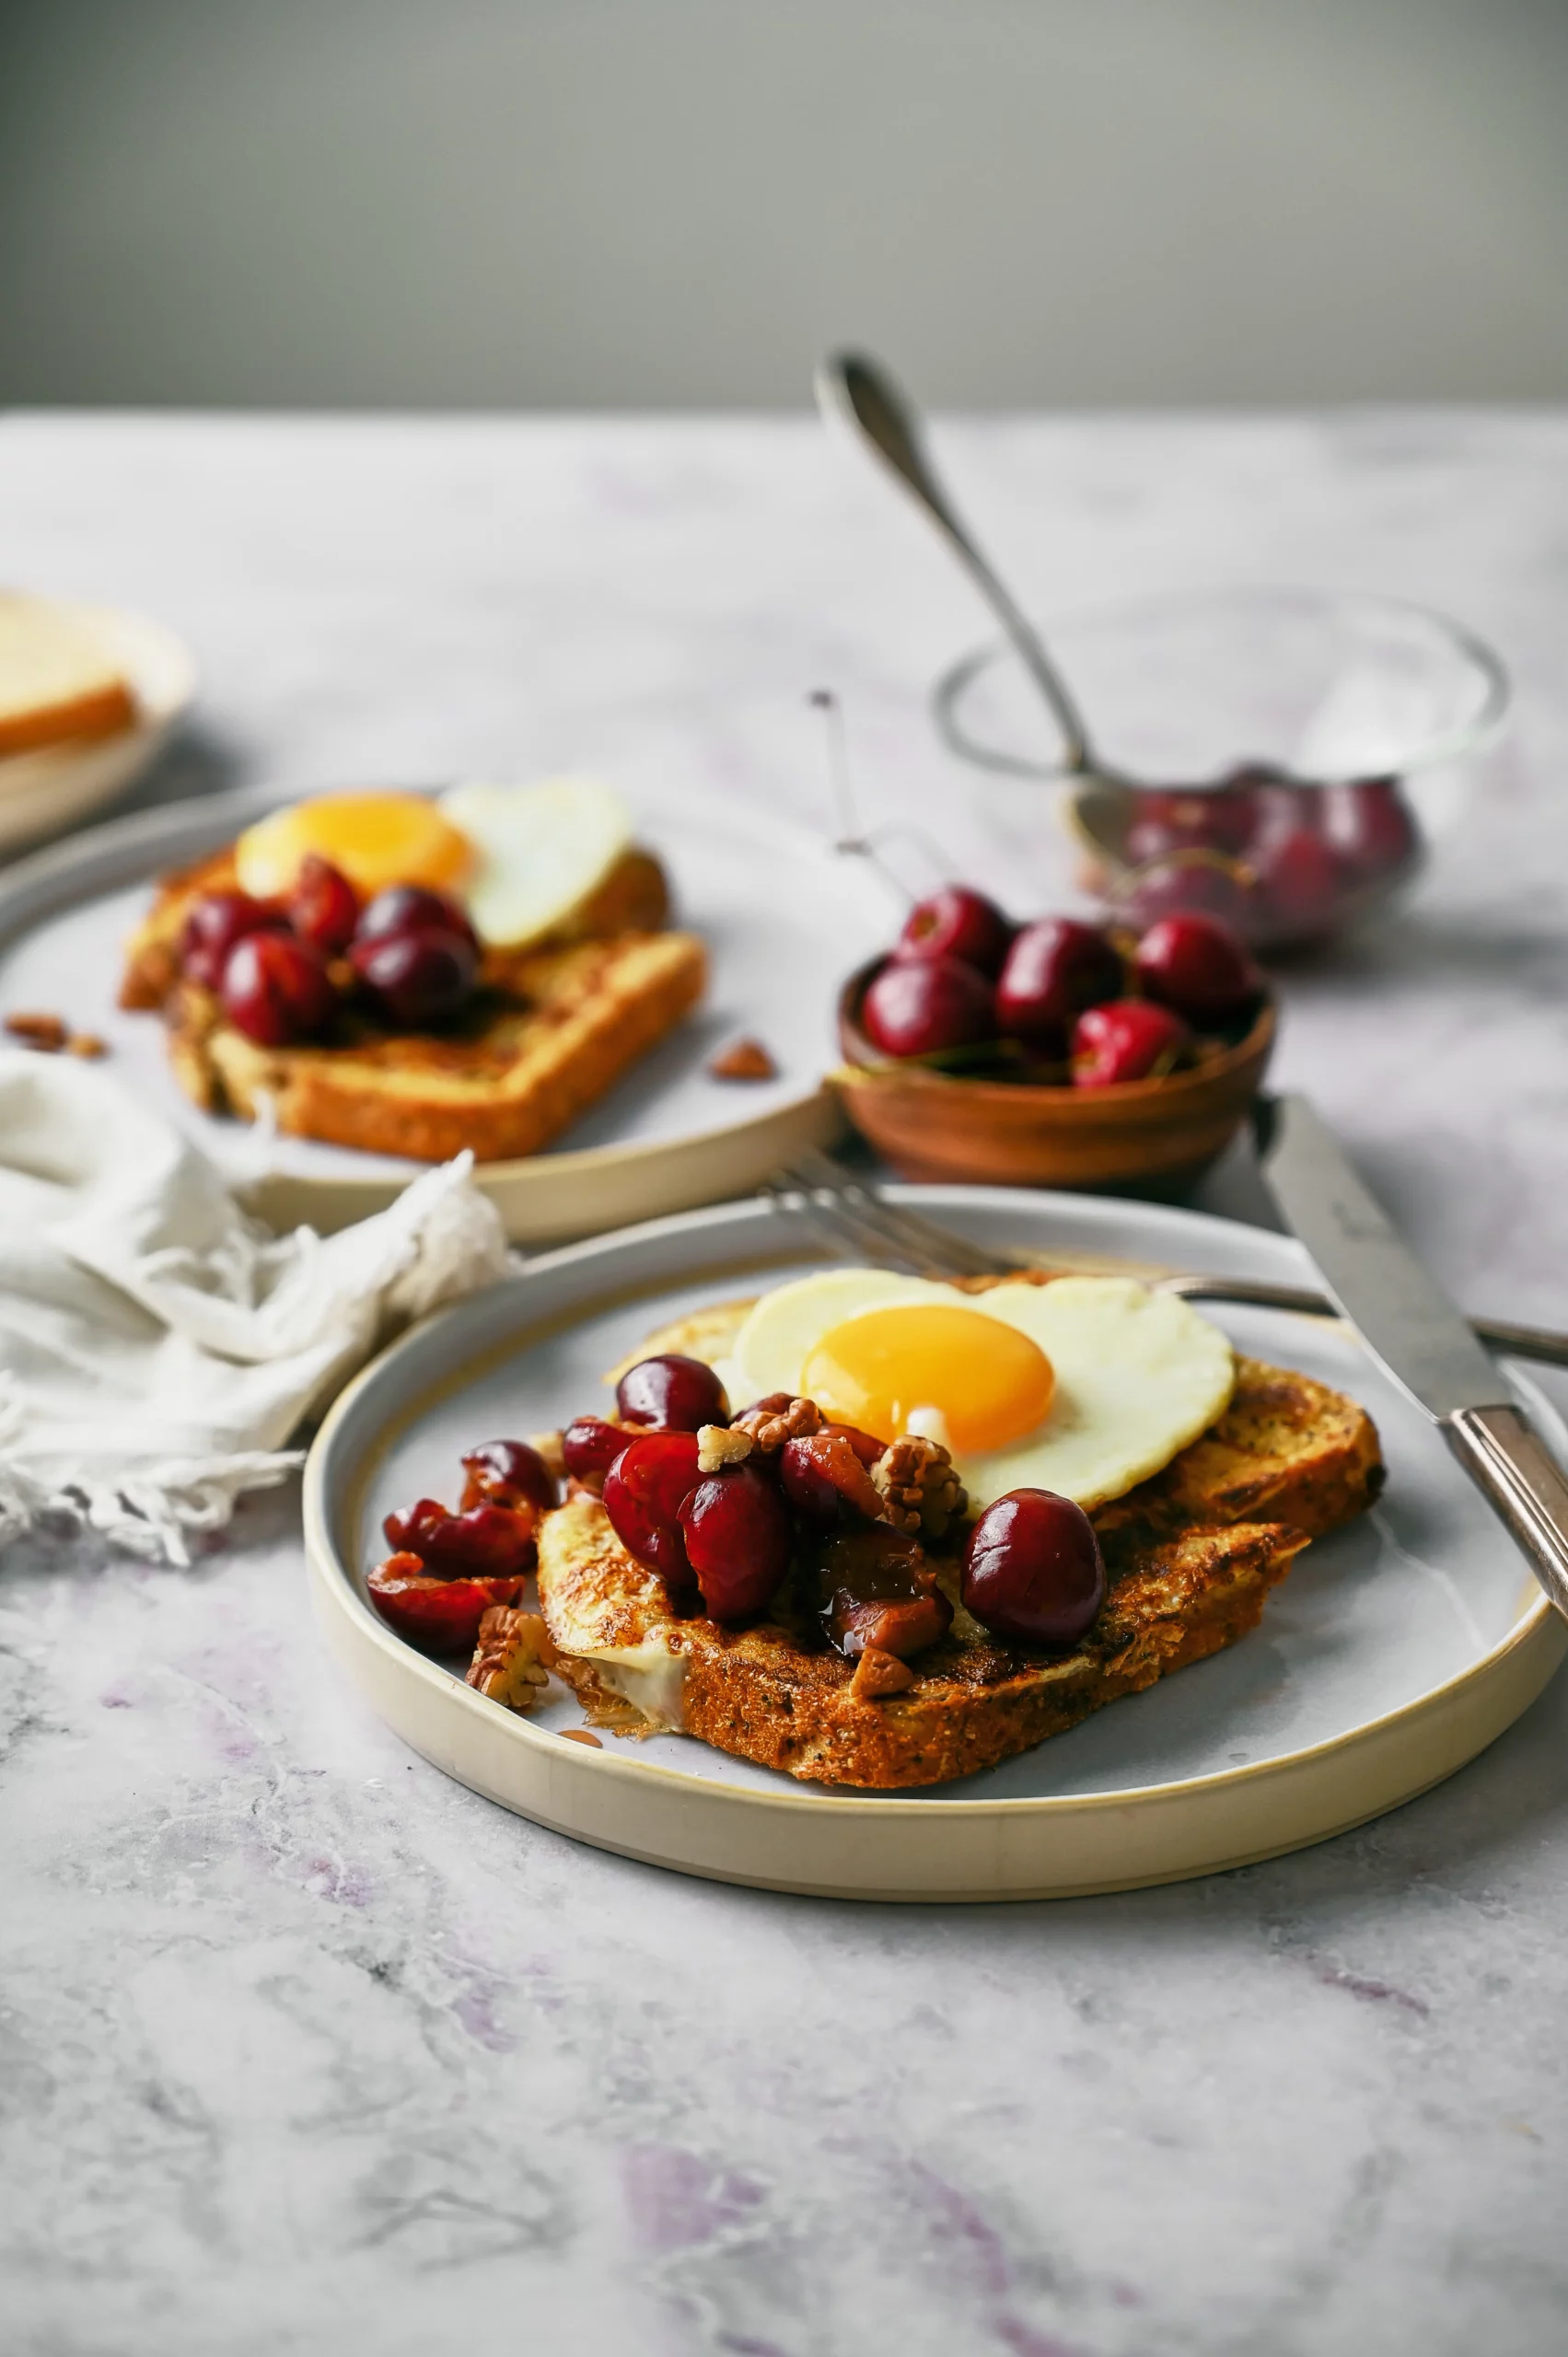 French toast with an egg on top with berries and nuts